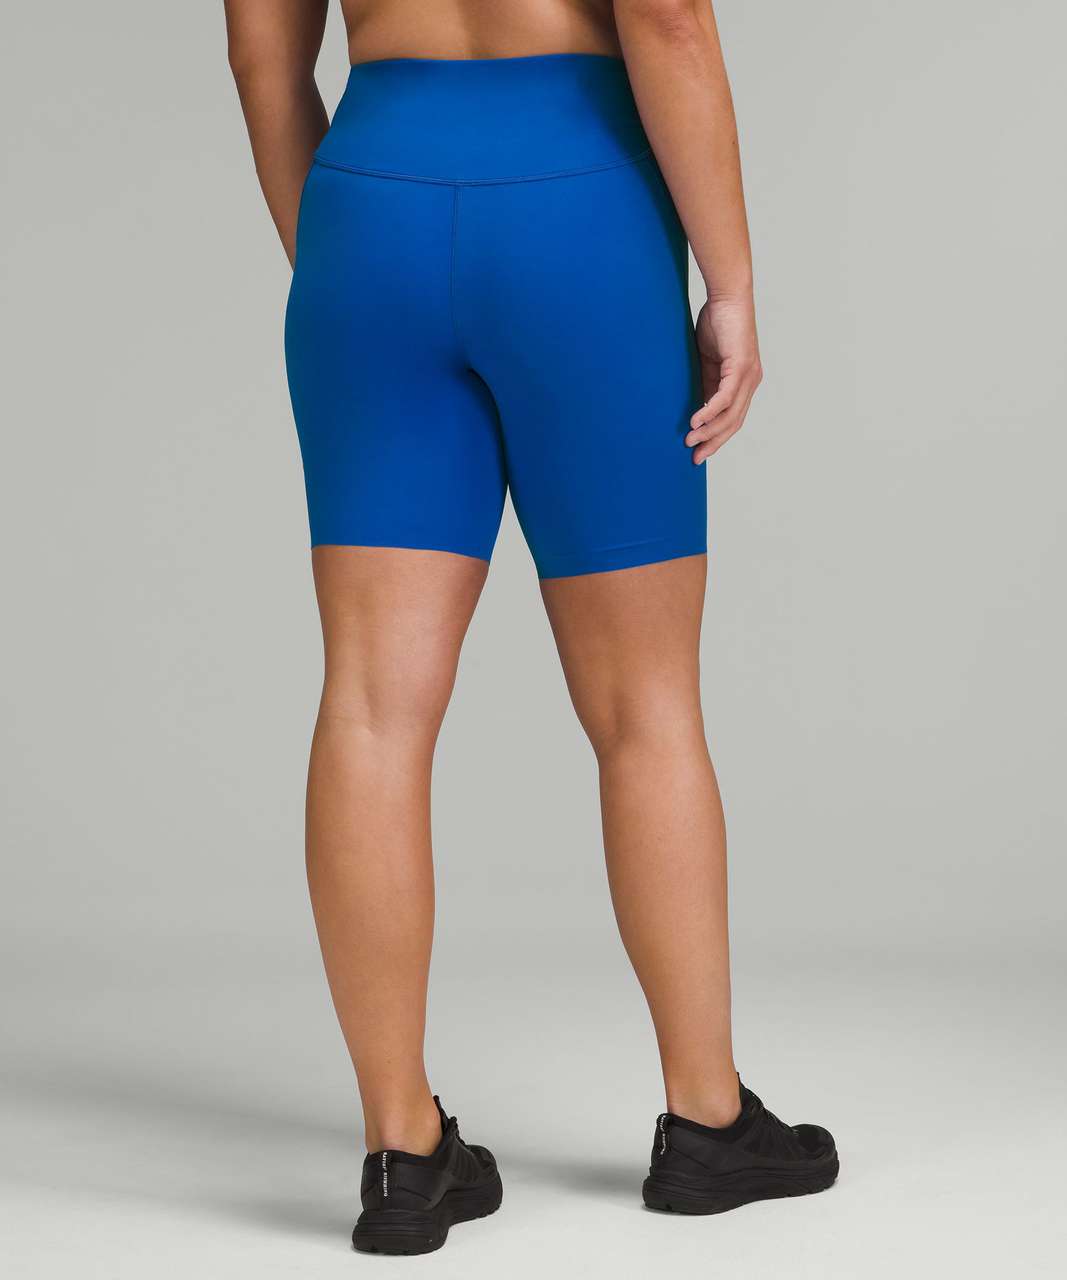 Workout fit All Powered Up Bra and Base Pace High-Rise Short 8 both in Blue  Nile : r/lululemon